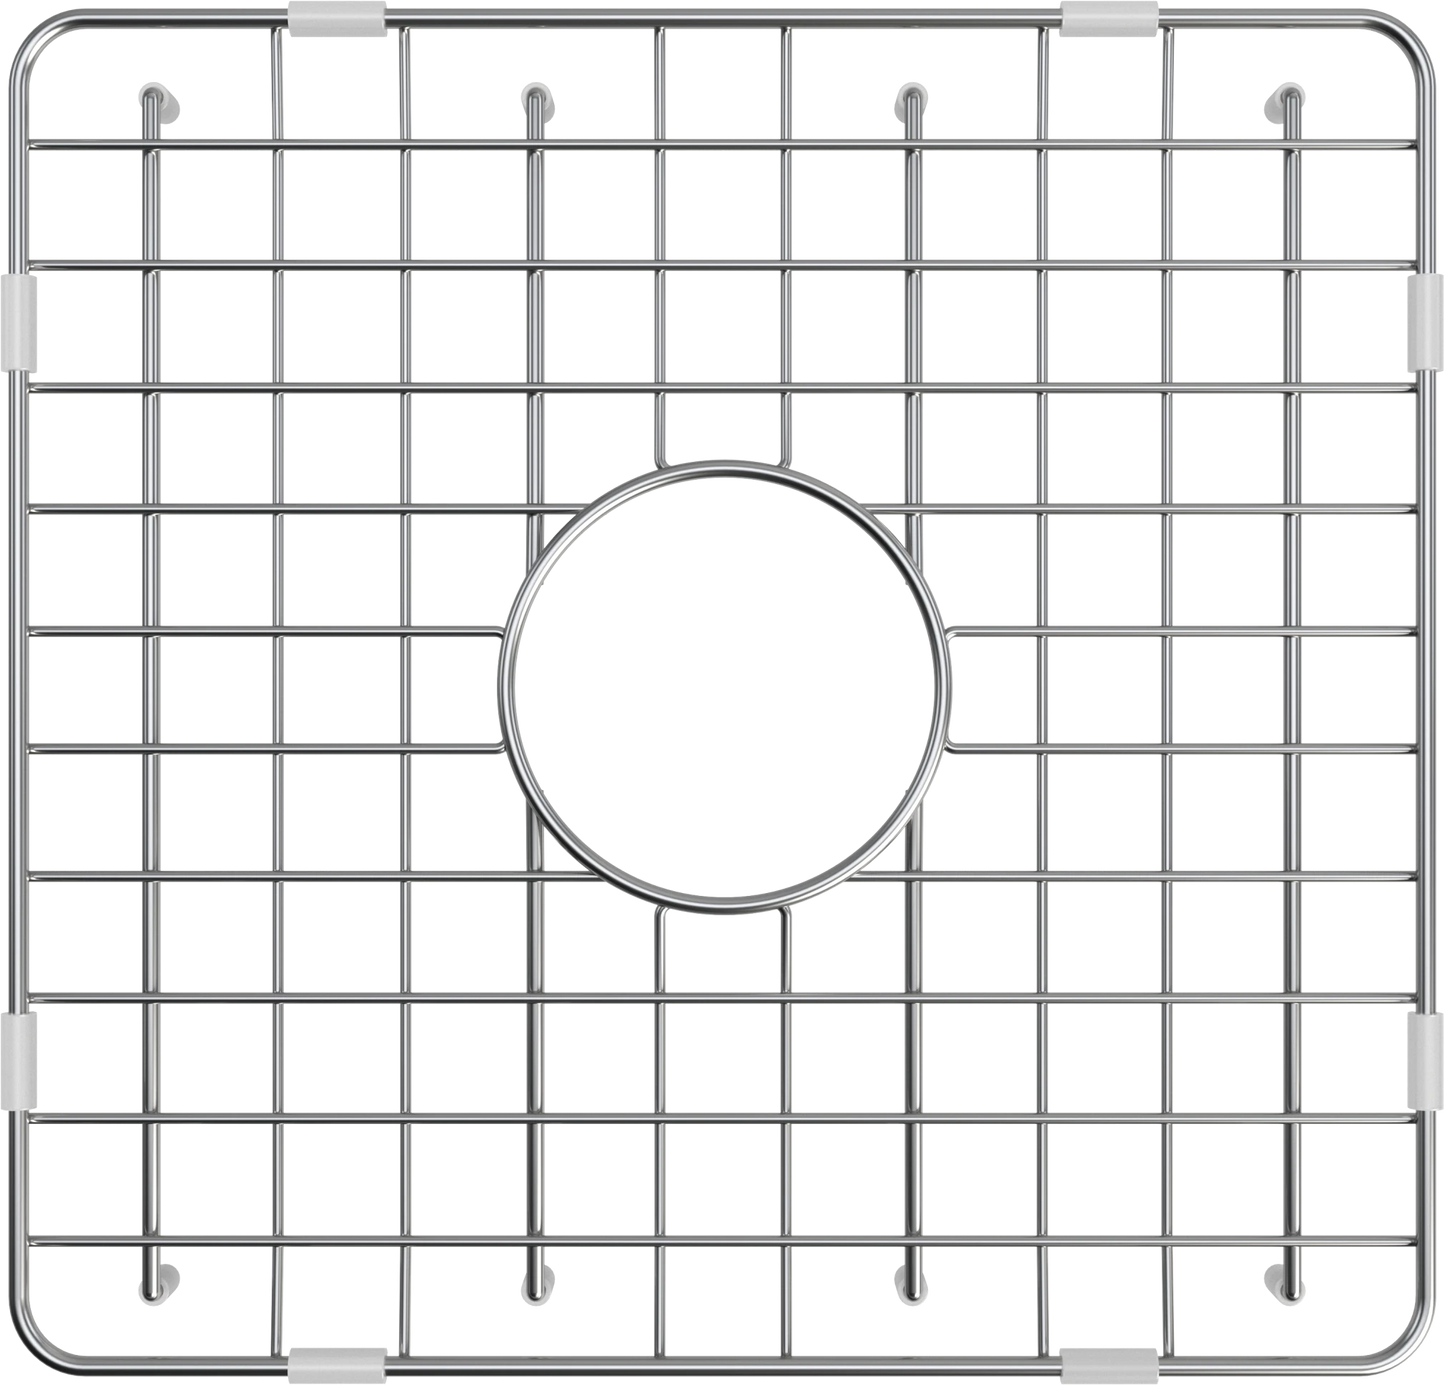 16.75 in. Grid for Large Side Fireclay Farmhouse Sink in Stainless Steel